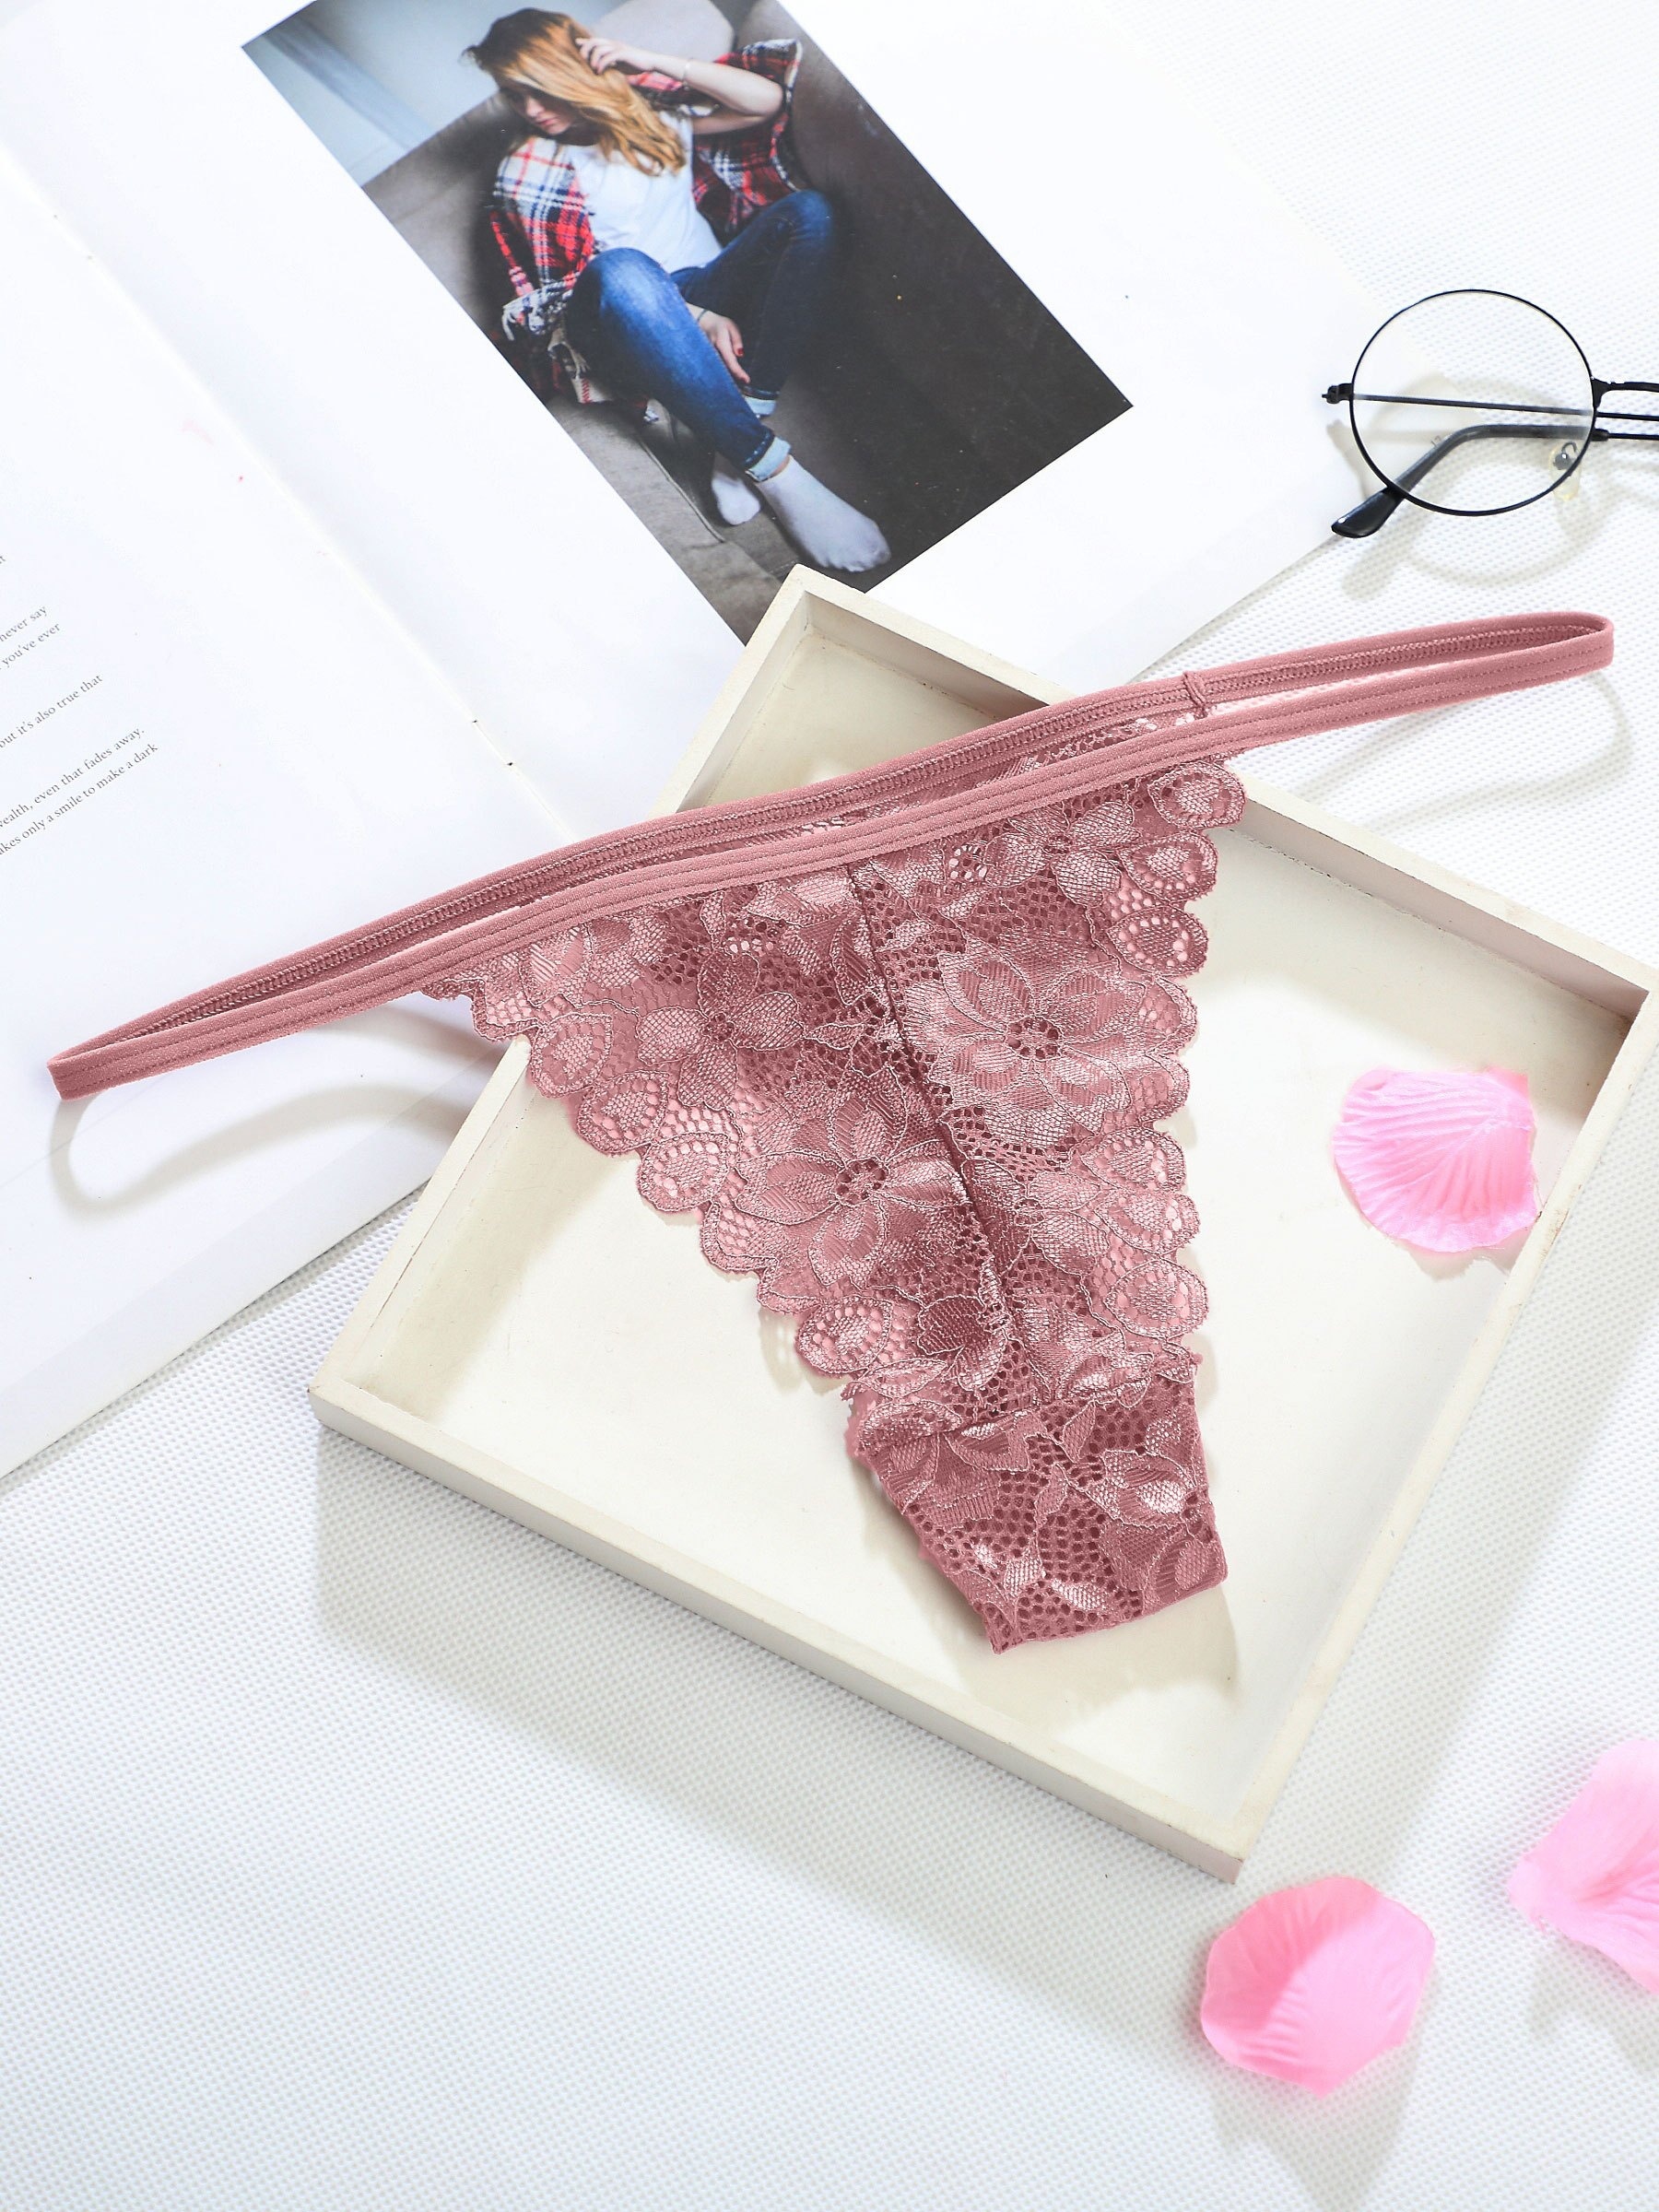 Floral lace thong [Coral] – The Pantry Underwear